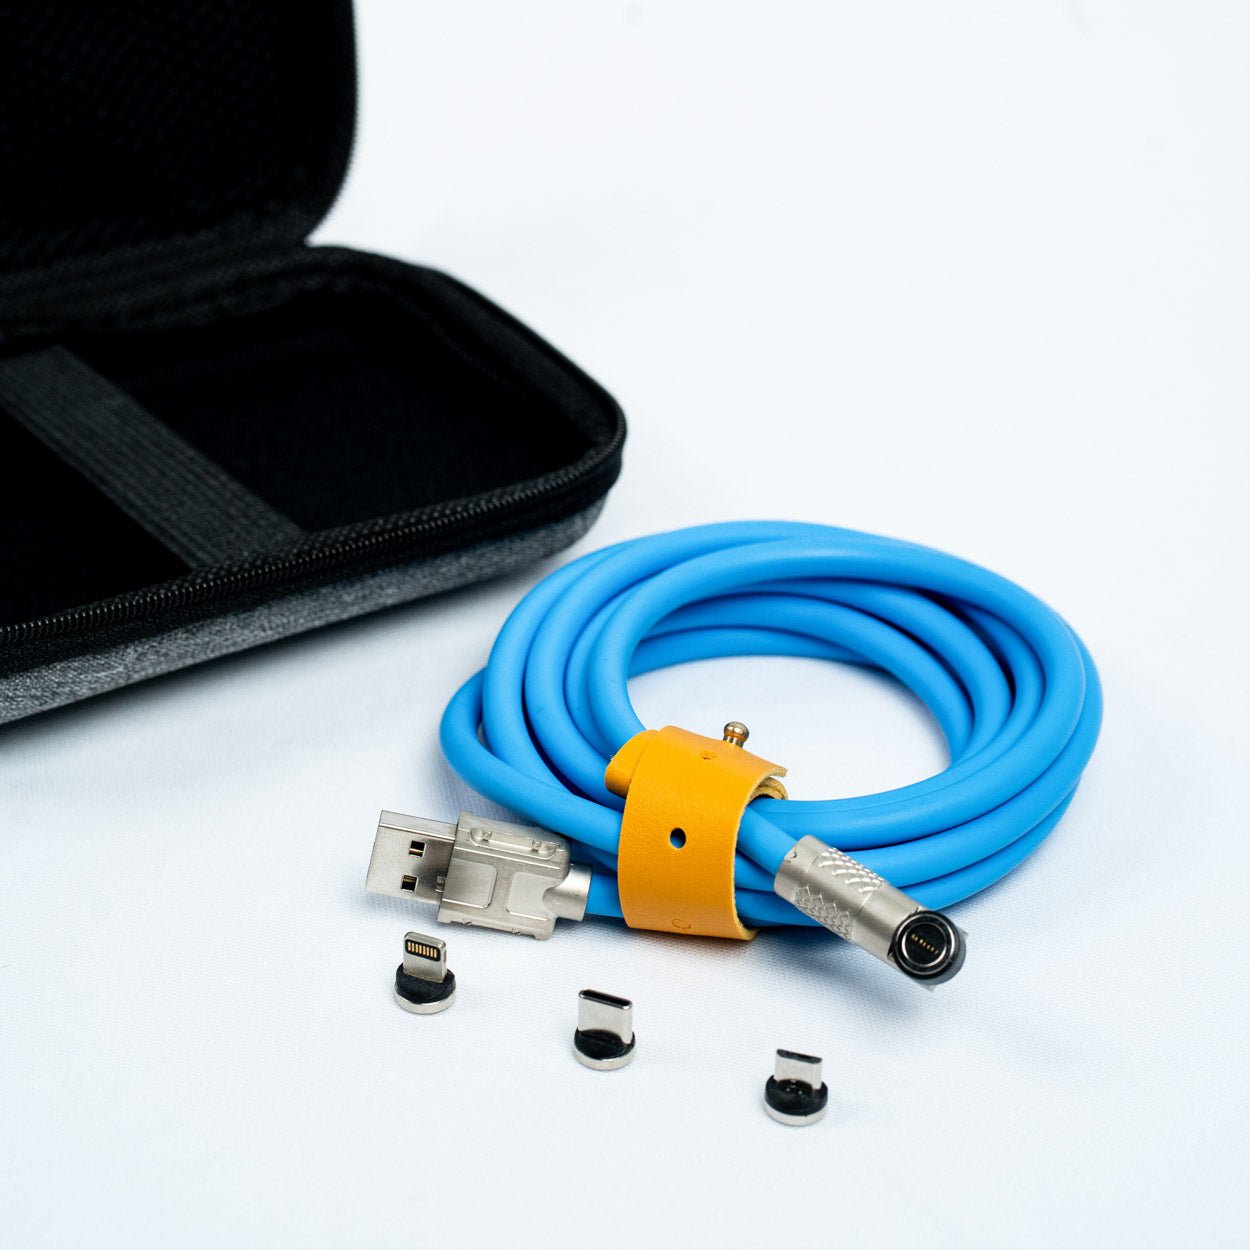 Flexible and Durable Luna Magnetic Cable for Various Devices